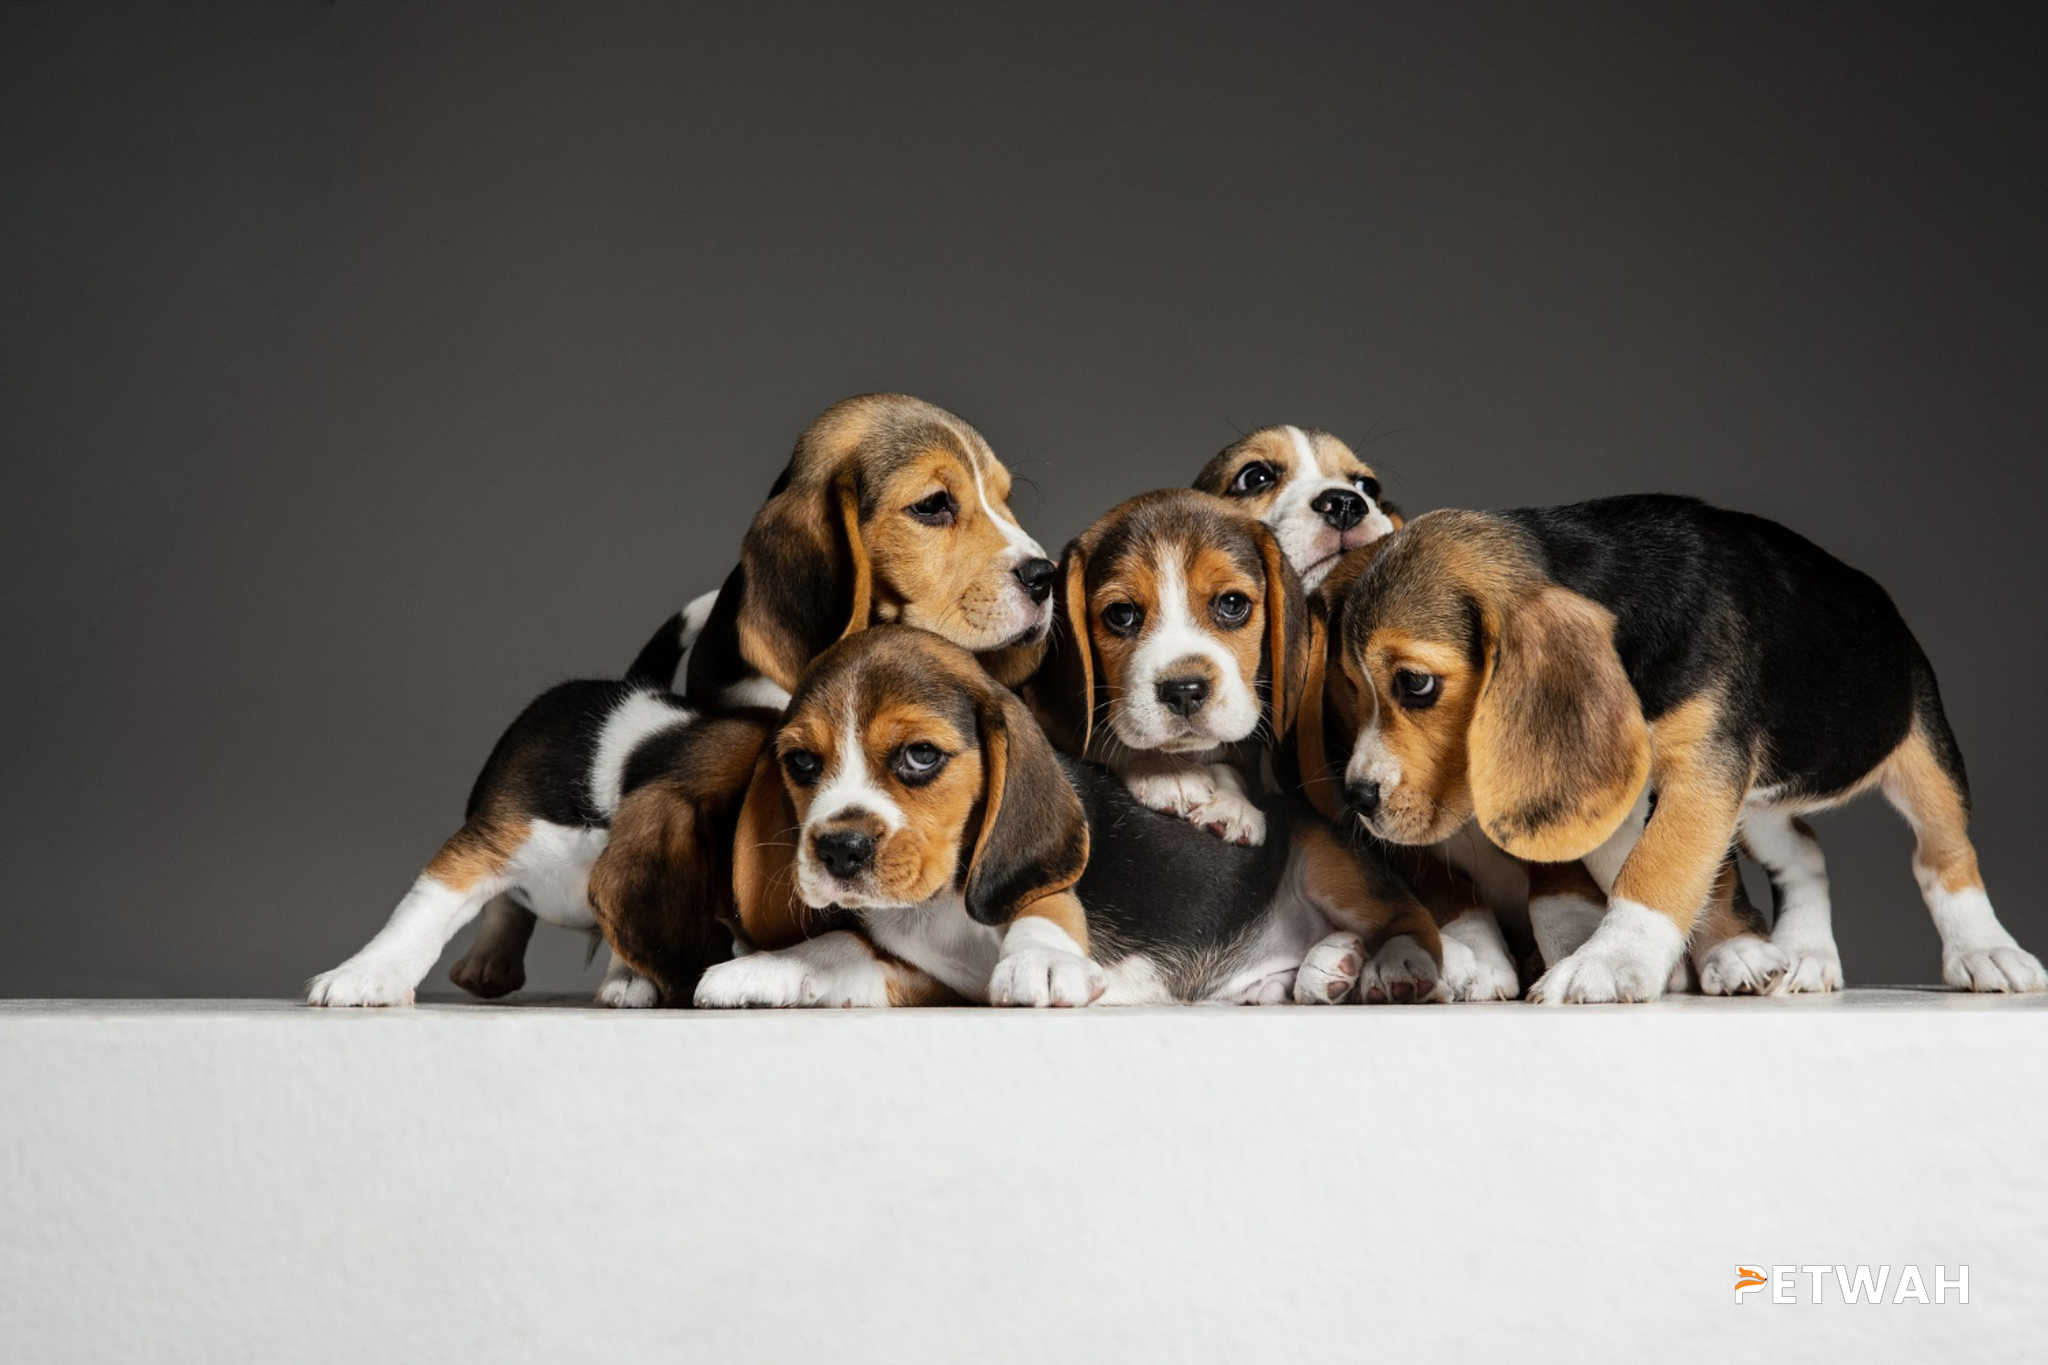 Fun Activities for Couples to Bond With Their Beagle